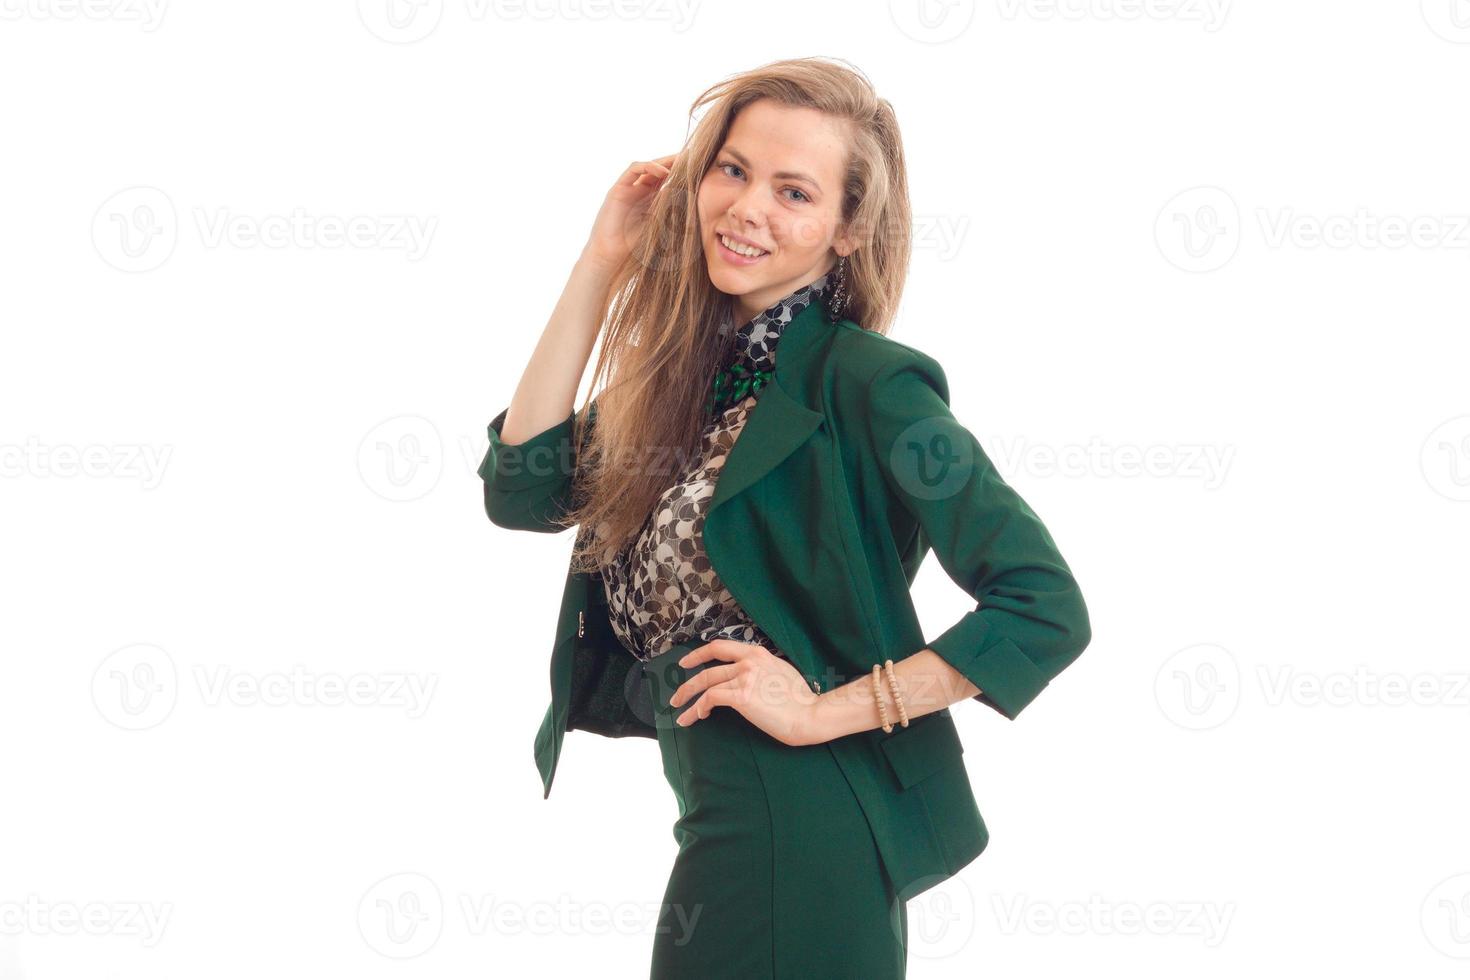 beautiful young girl with blond hair smiling and posing for the camera in a green suit photo